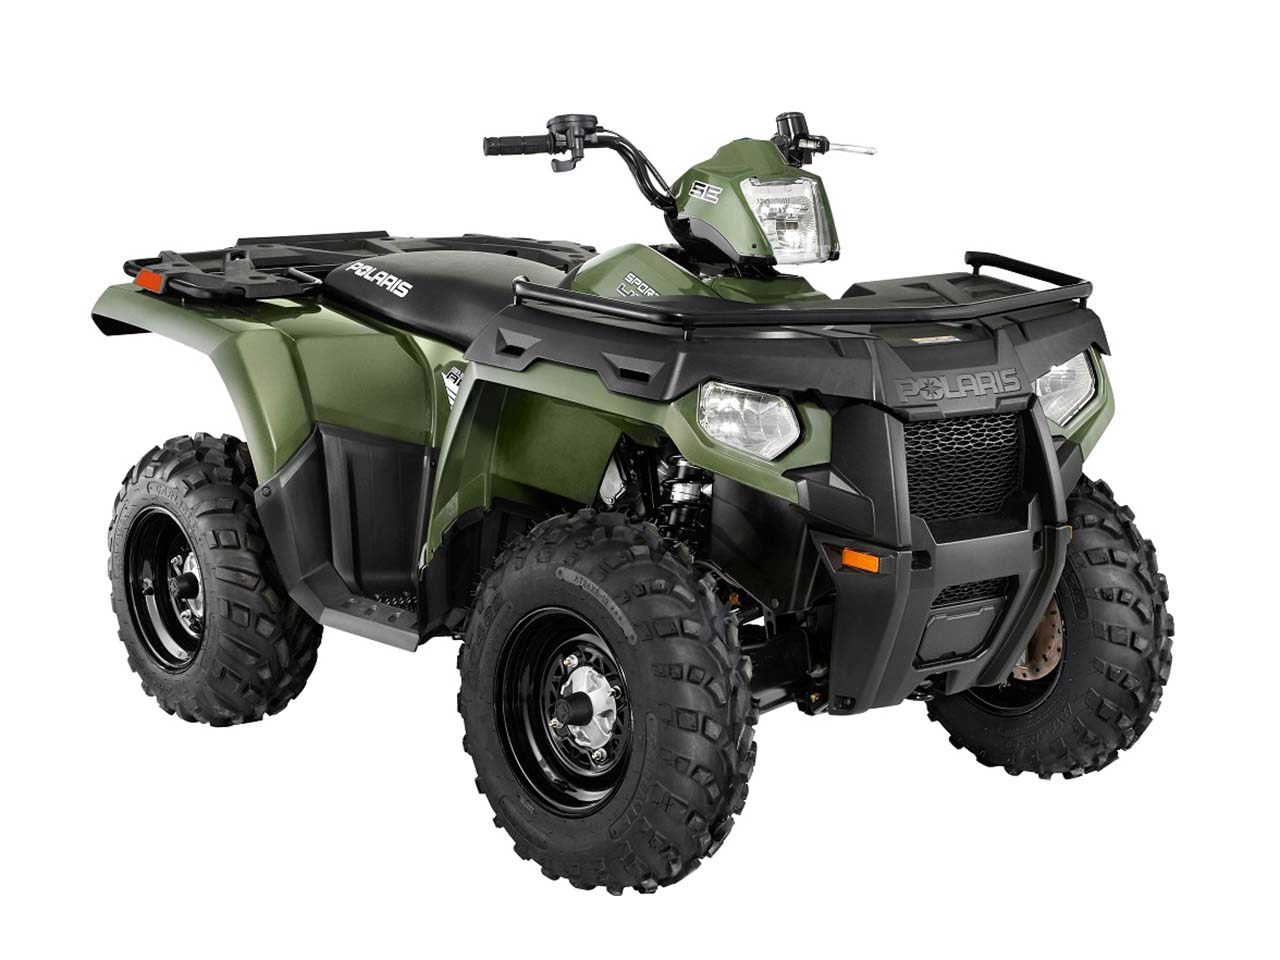 2013 Polaris Introduces New Limited Edition for ATV Enthusiasts in ...